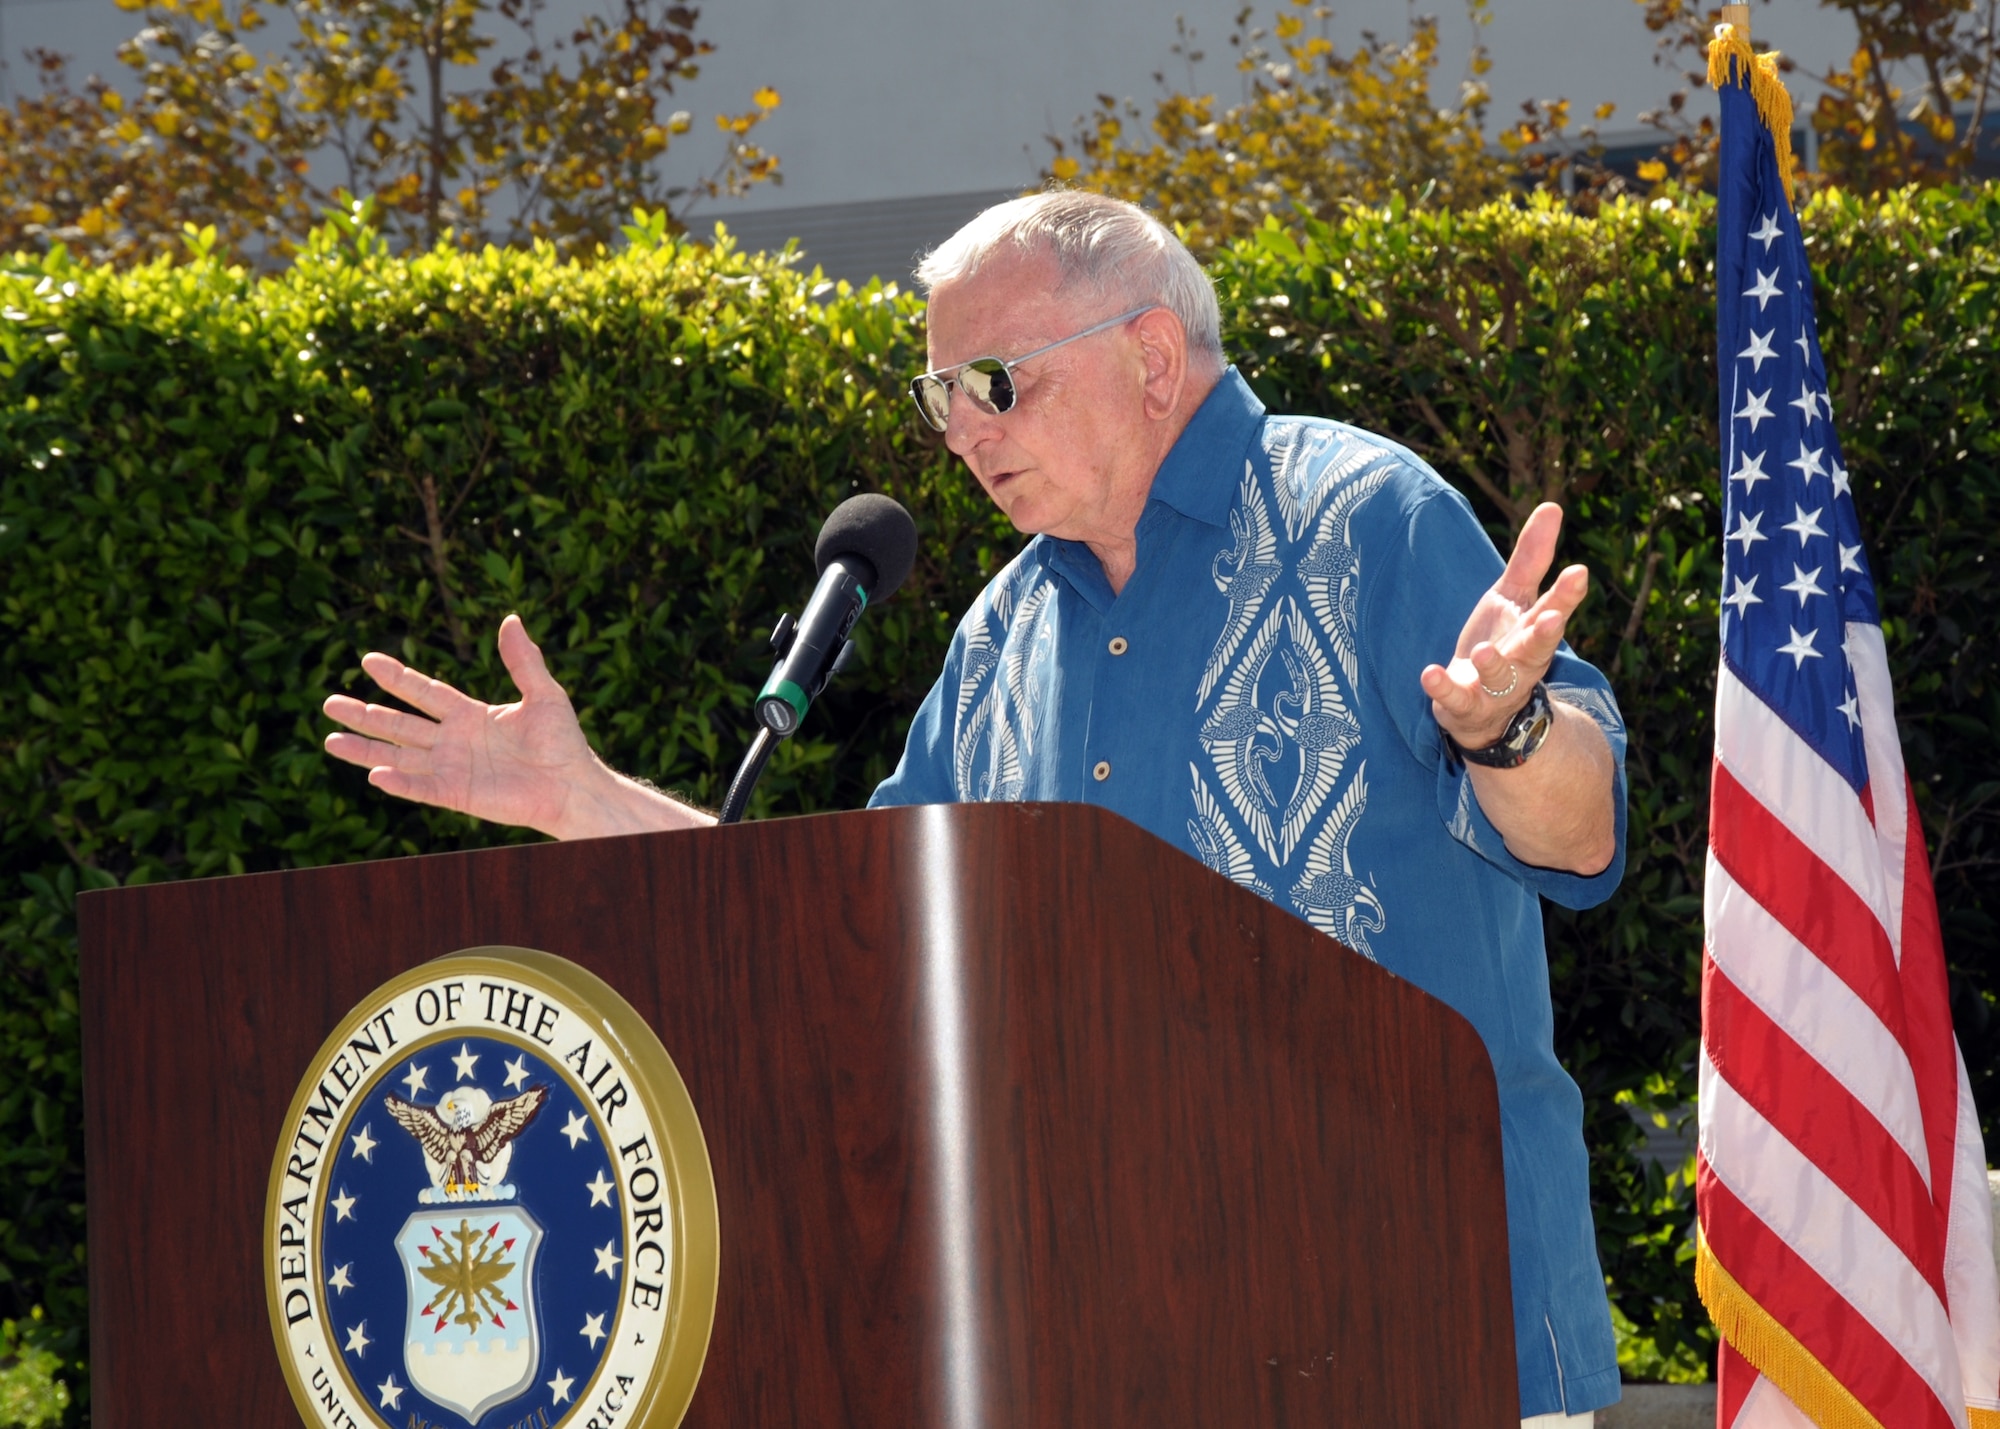 Retired Air Force Col. Kenneth Hughey spoke about his captivity in the “Hanoi Hilton” during the Vietnam War. The retired colonel was the featured speaker at the POW/MIA Day ceremony following the end of the torch relay, Sept. 18. (Photo by Lou Hernandez)